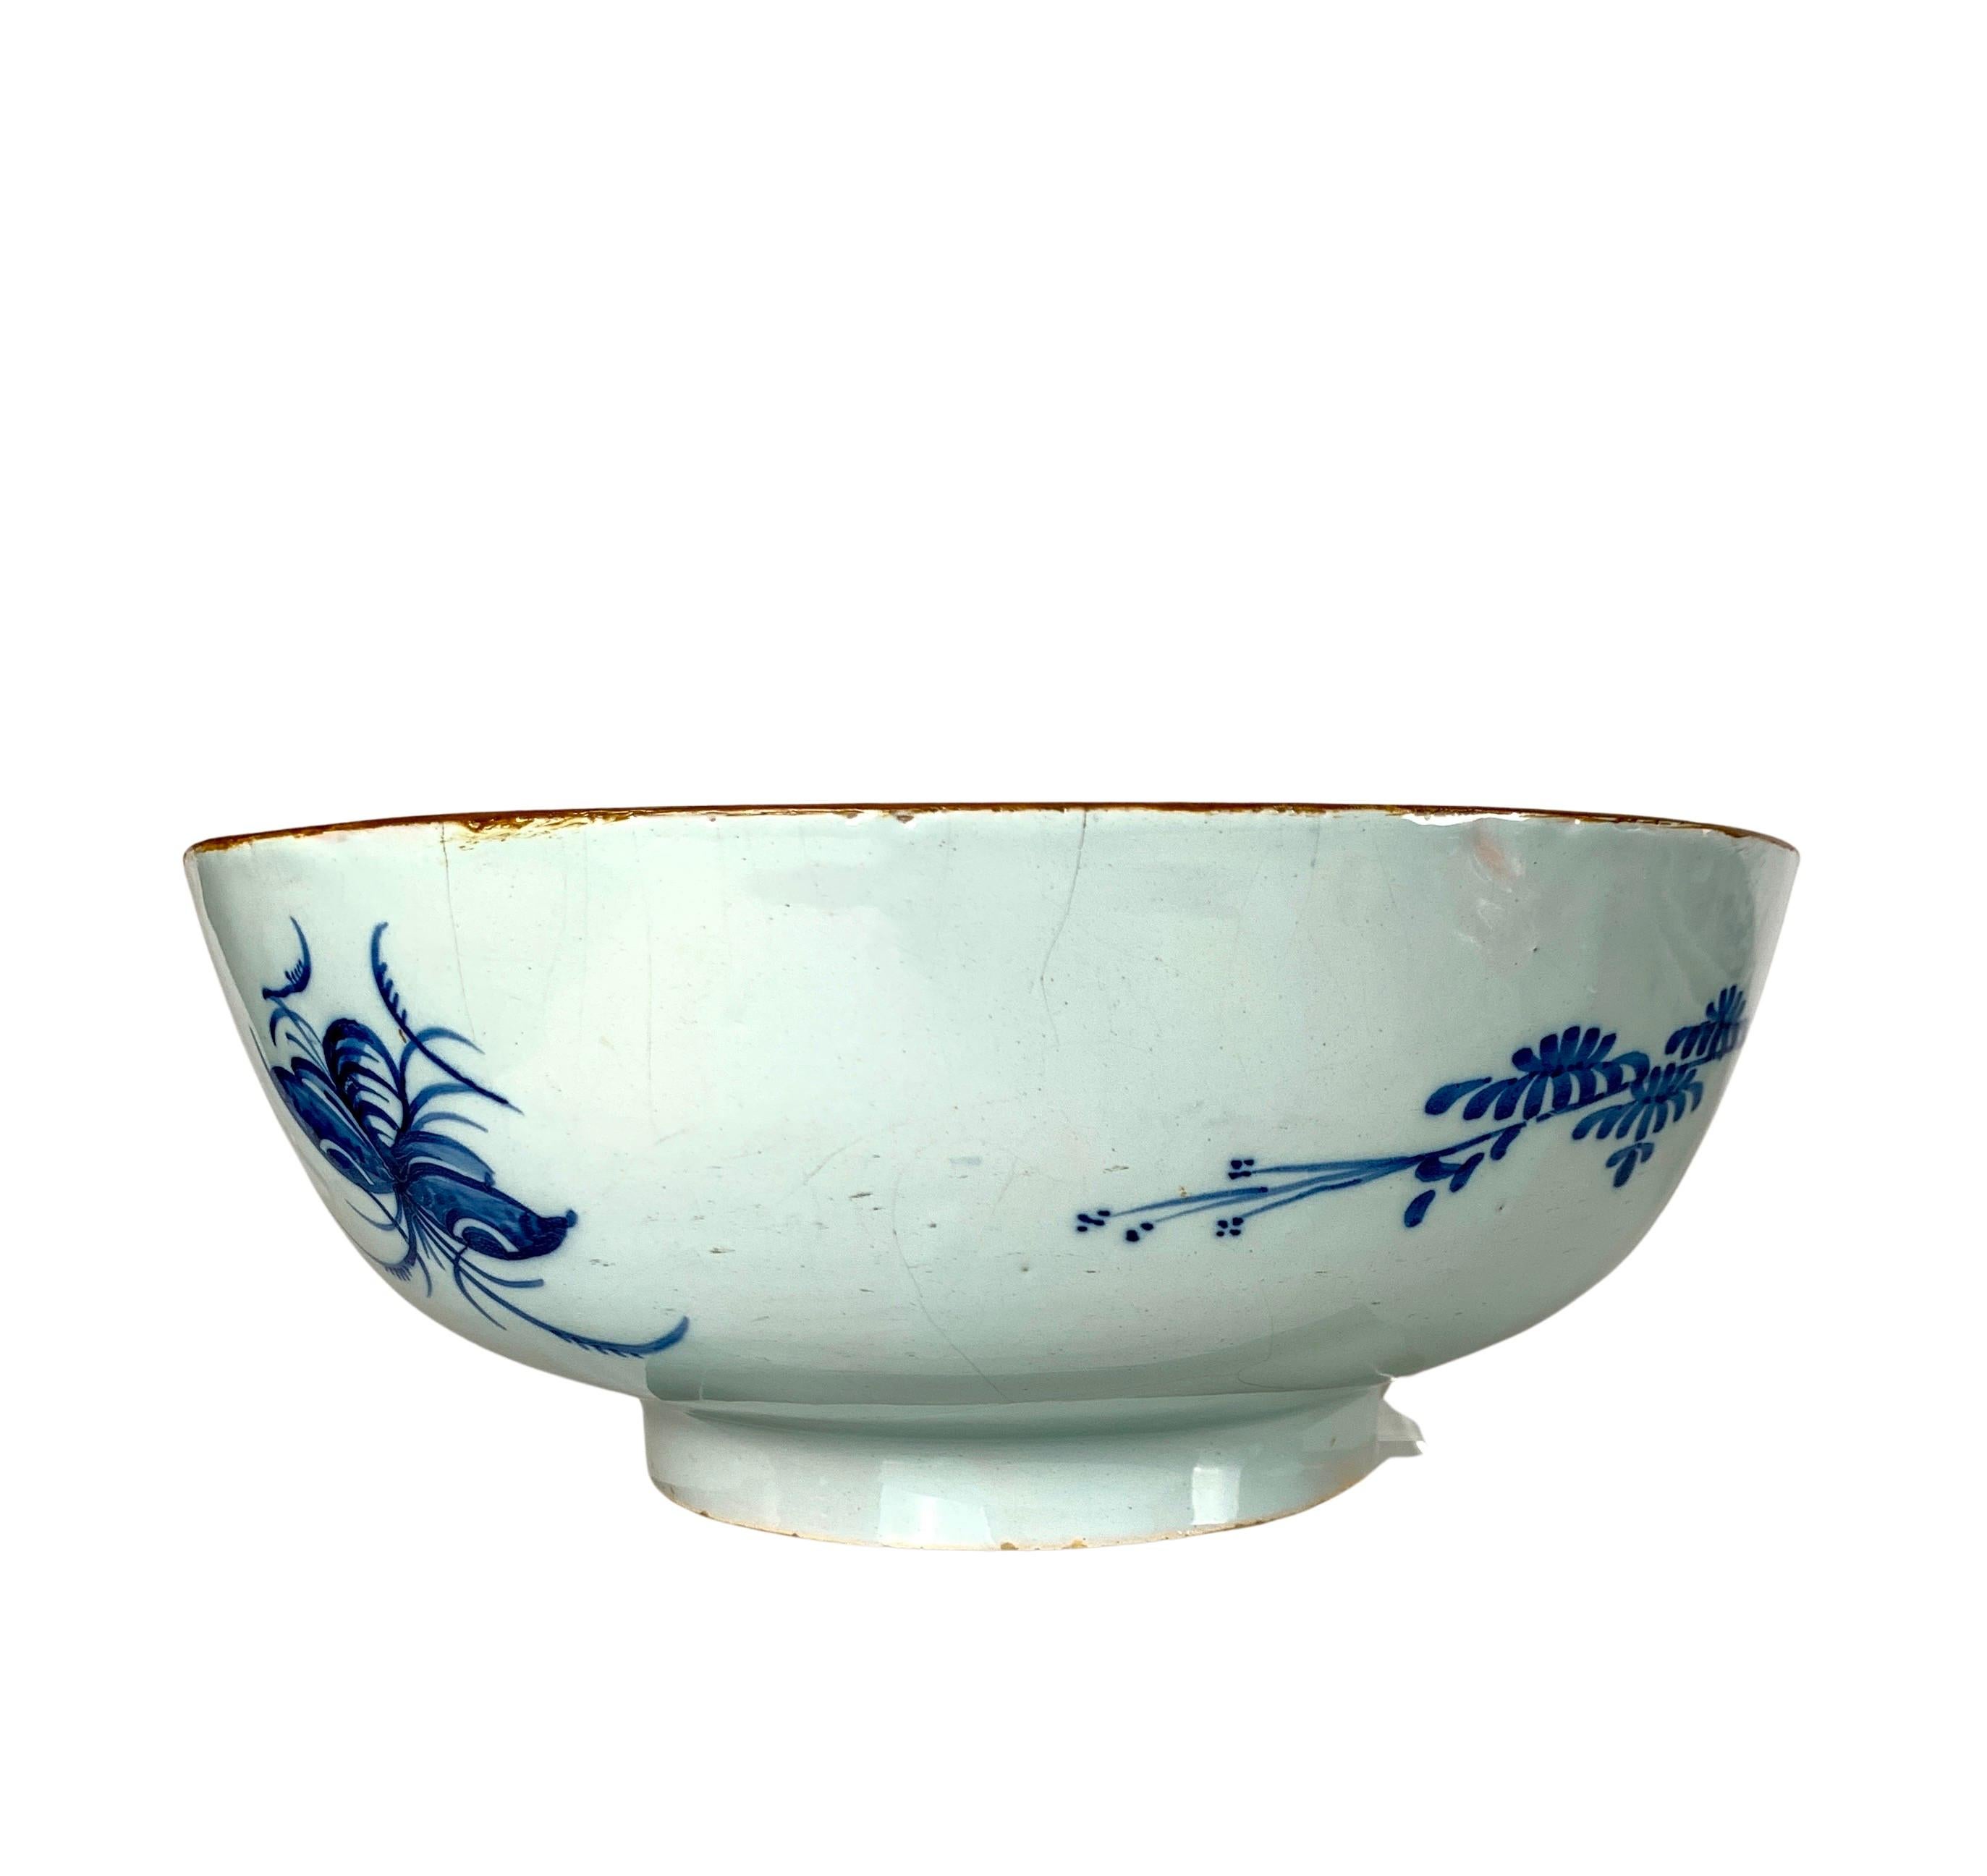 Hand-Painted Blue and White Delft Punch Bowl Hand Painted Mid 18th Century Netherlands For Sale